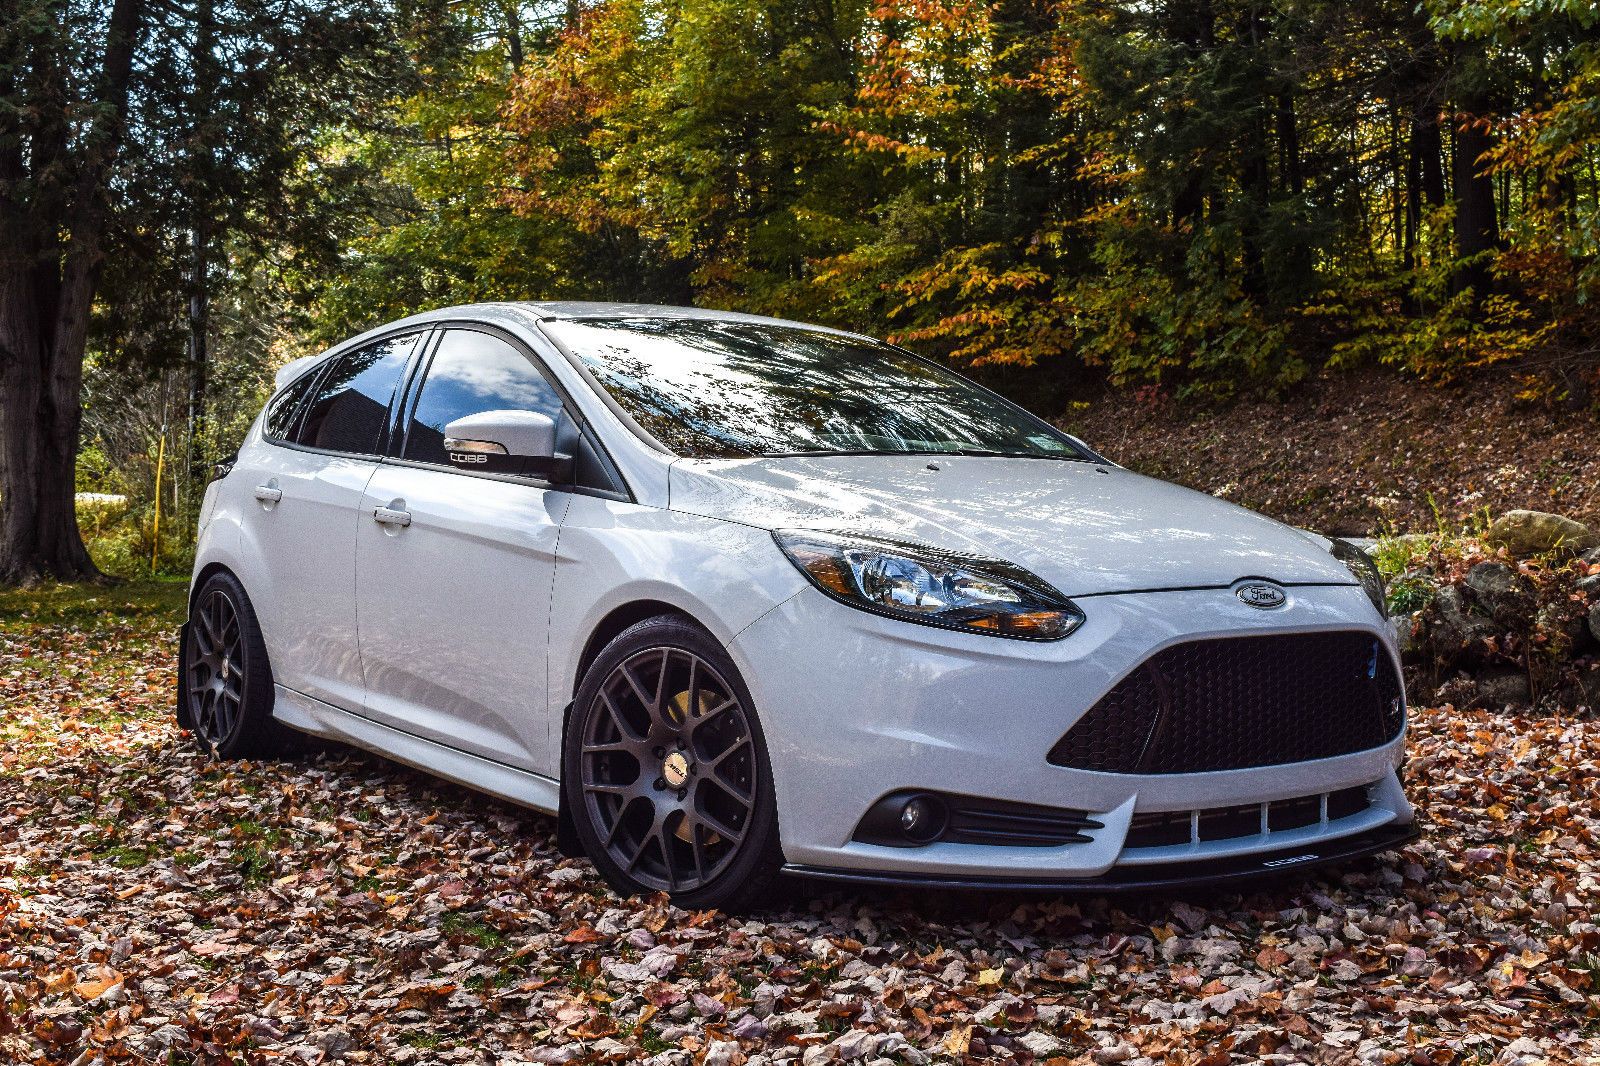 2013 Ford Focus ST (tuned by Panda Motorworks) for sale | Ford focus st, Ford  focus, Ford focus wagon